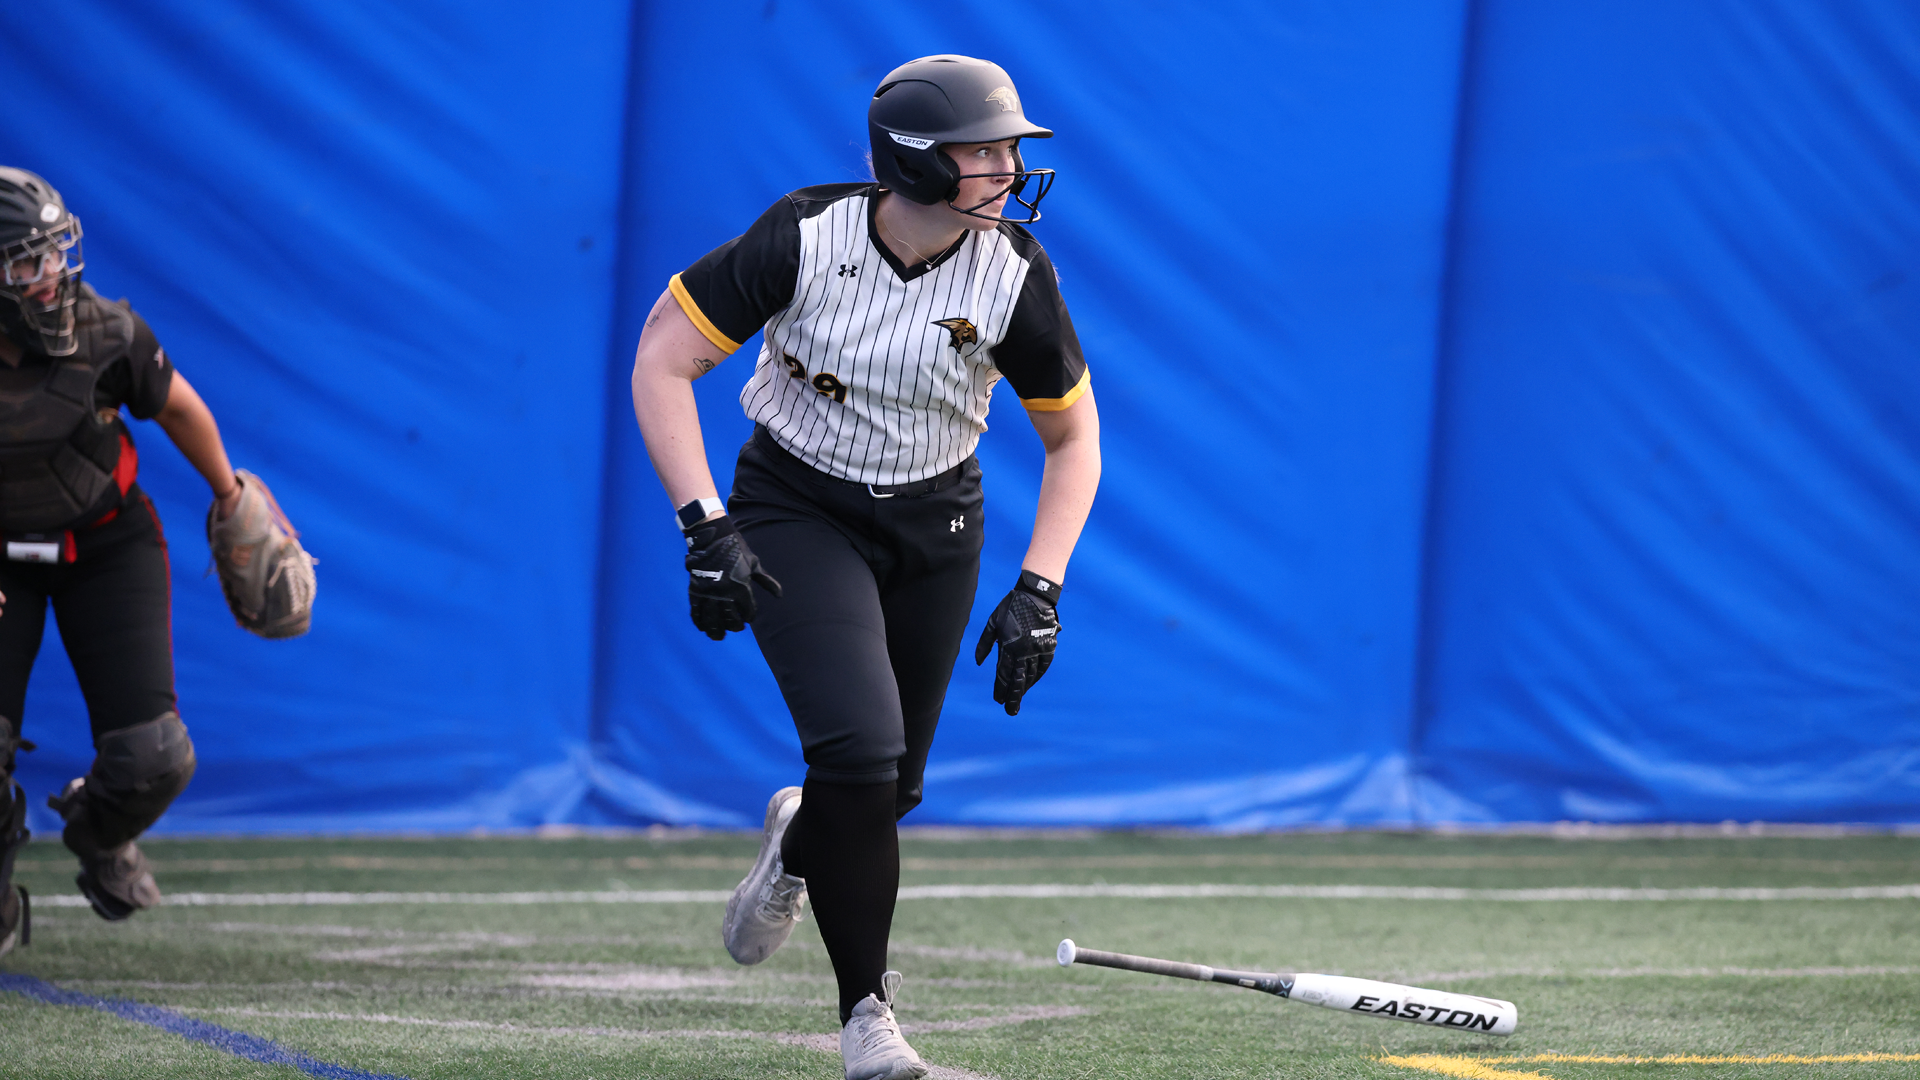 Hannah Ritter knocked in two runs against Gustavus Adolphus before being walked three times by Colby on Thursday. Photo Credit: Steve Frommell, UW-Oshkosh Sports Information